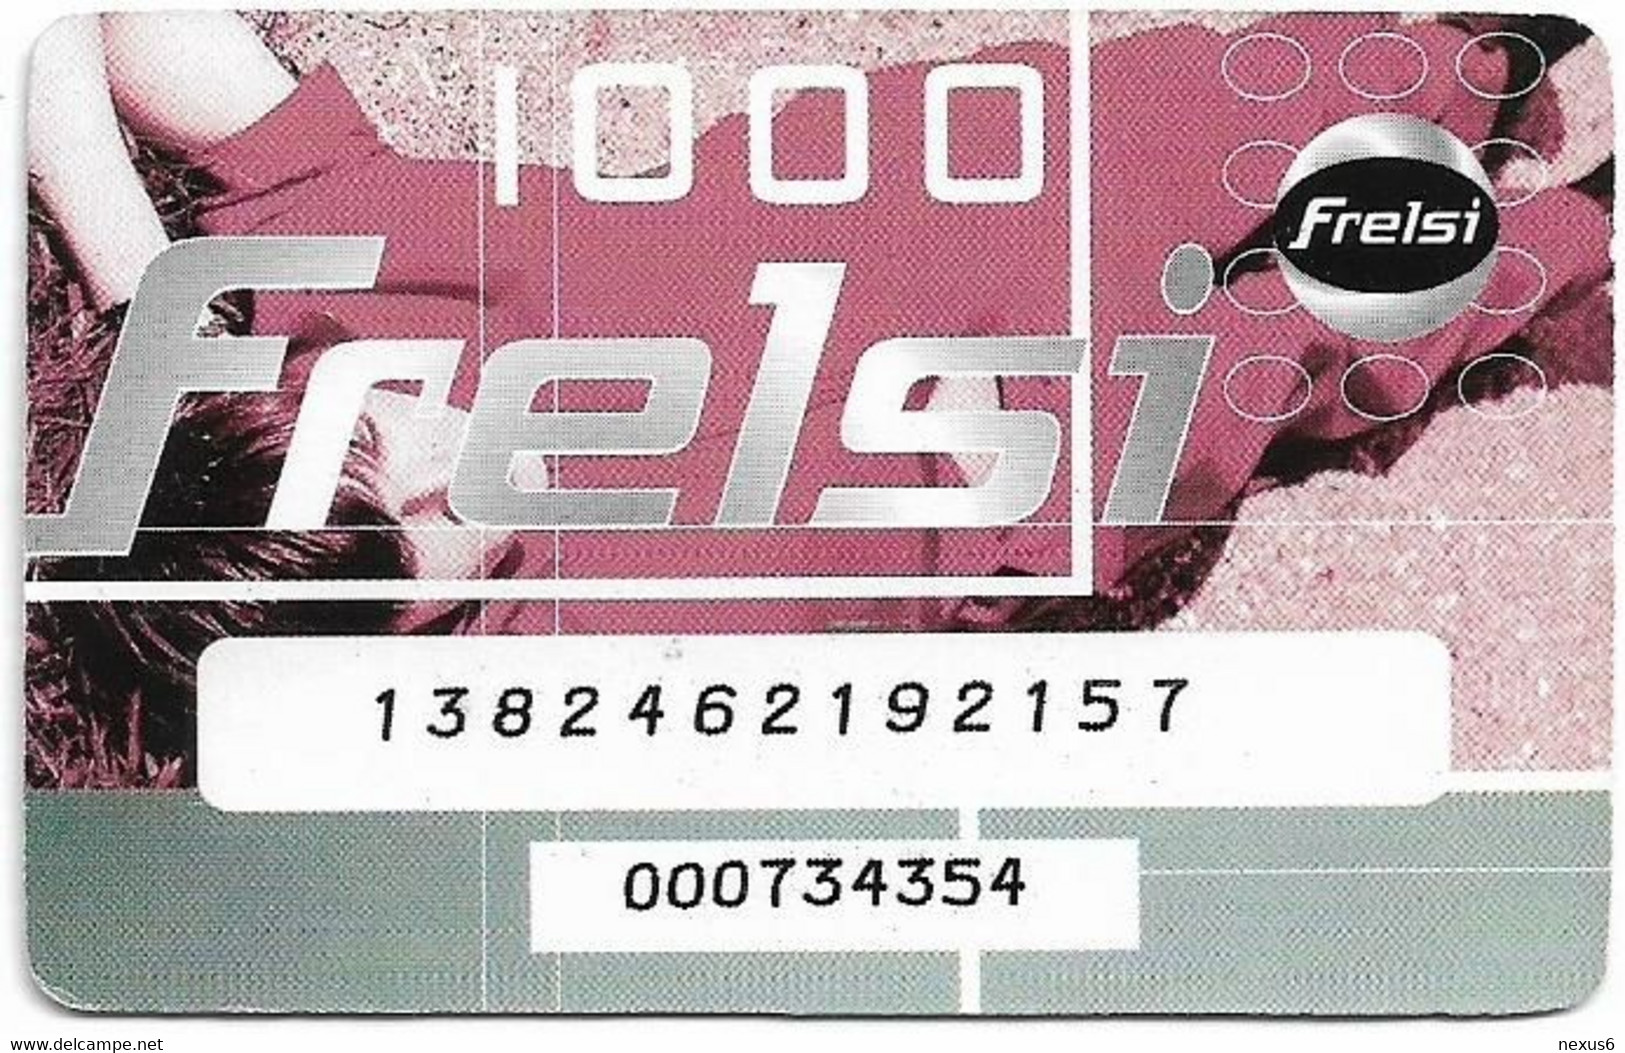 Iceland - Siminn - Frelsi, Lying Man, (Pink), PIN No. Type #2, GSM Refill 1.000Kr, Used - Iceland